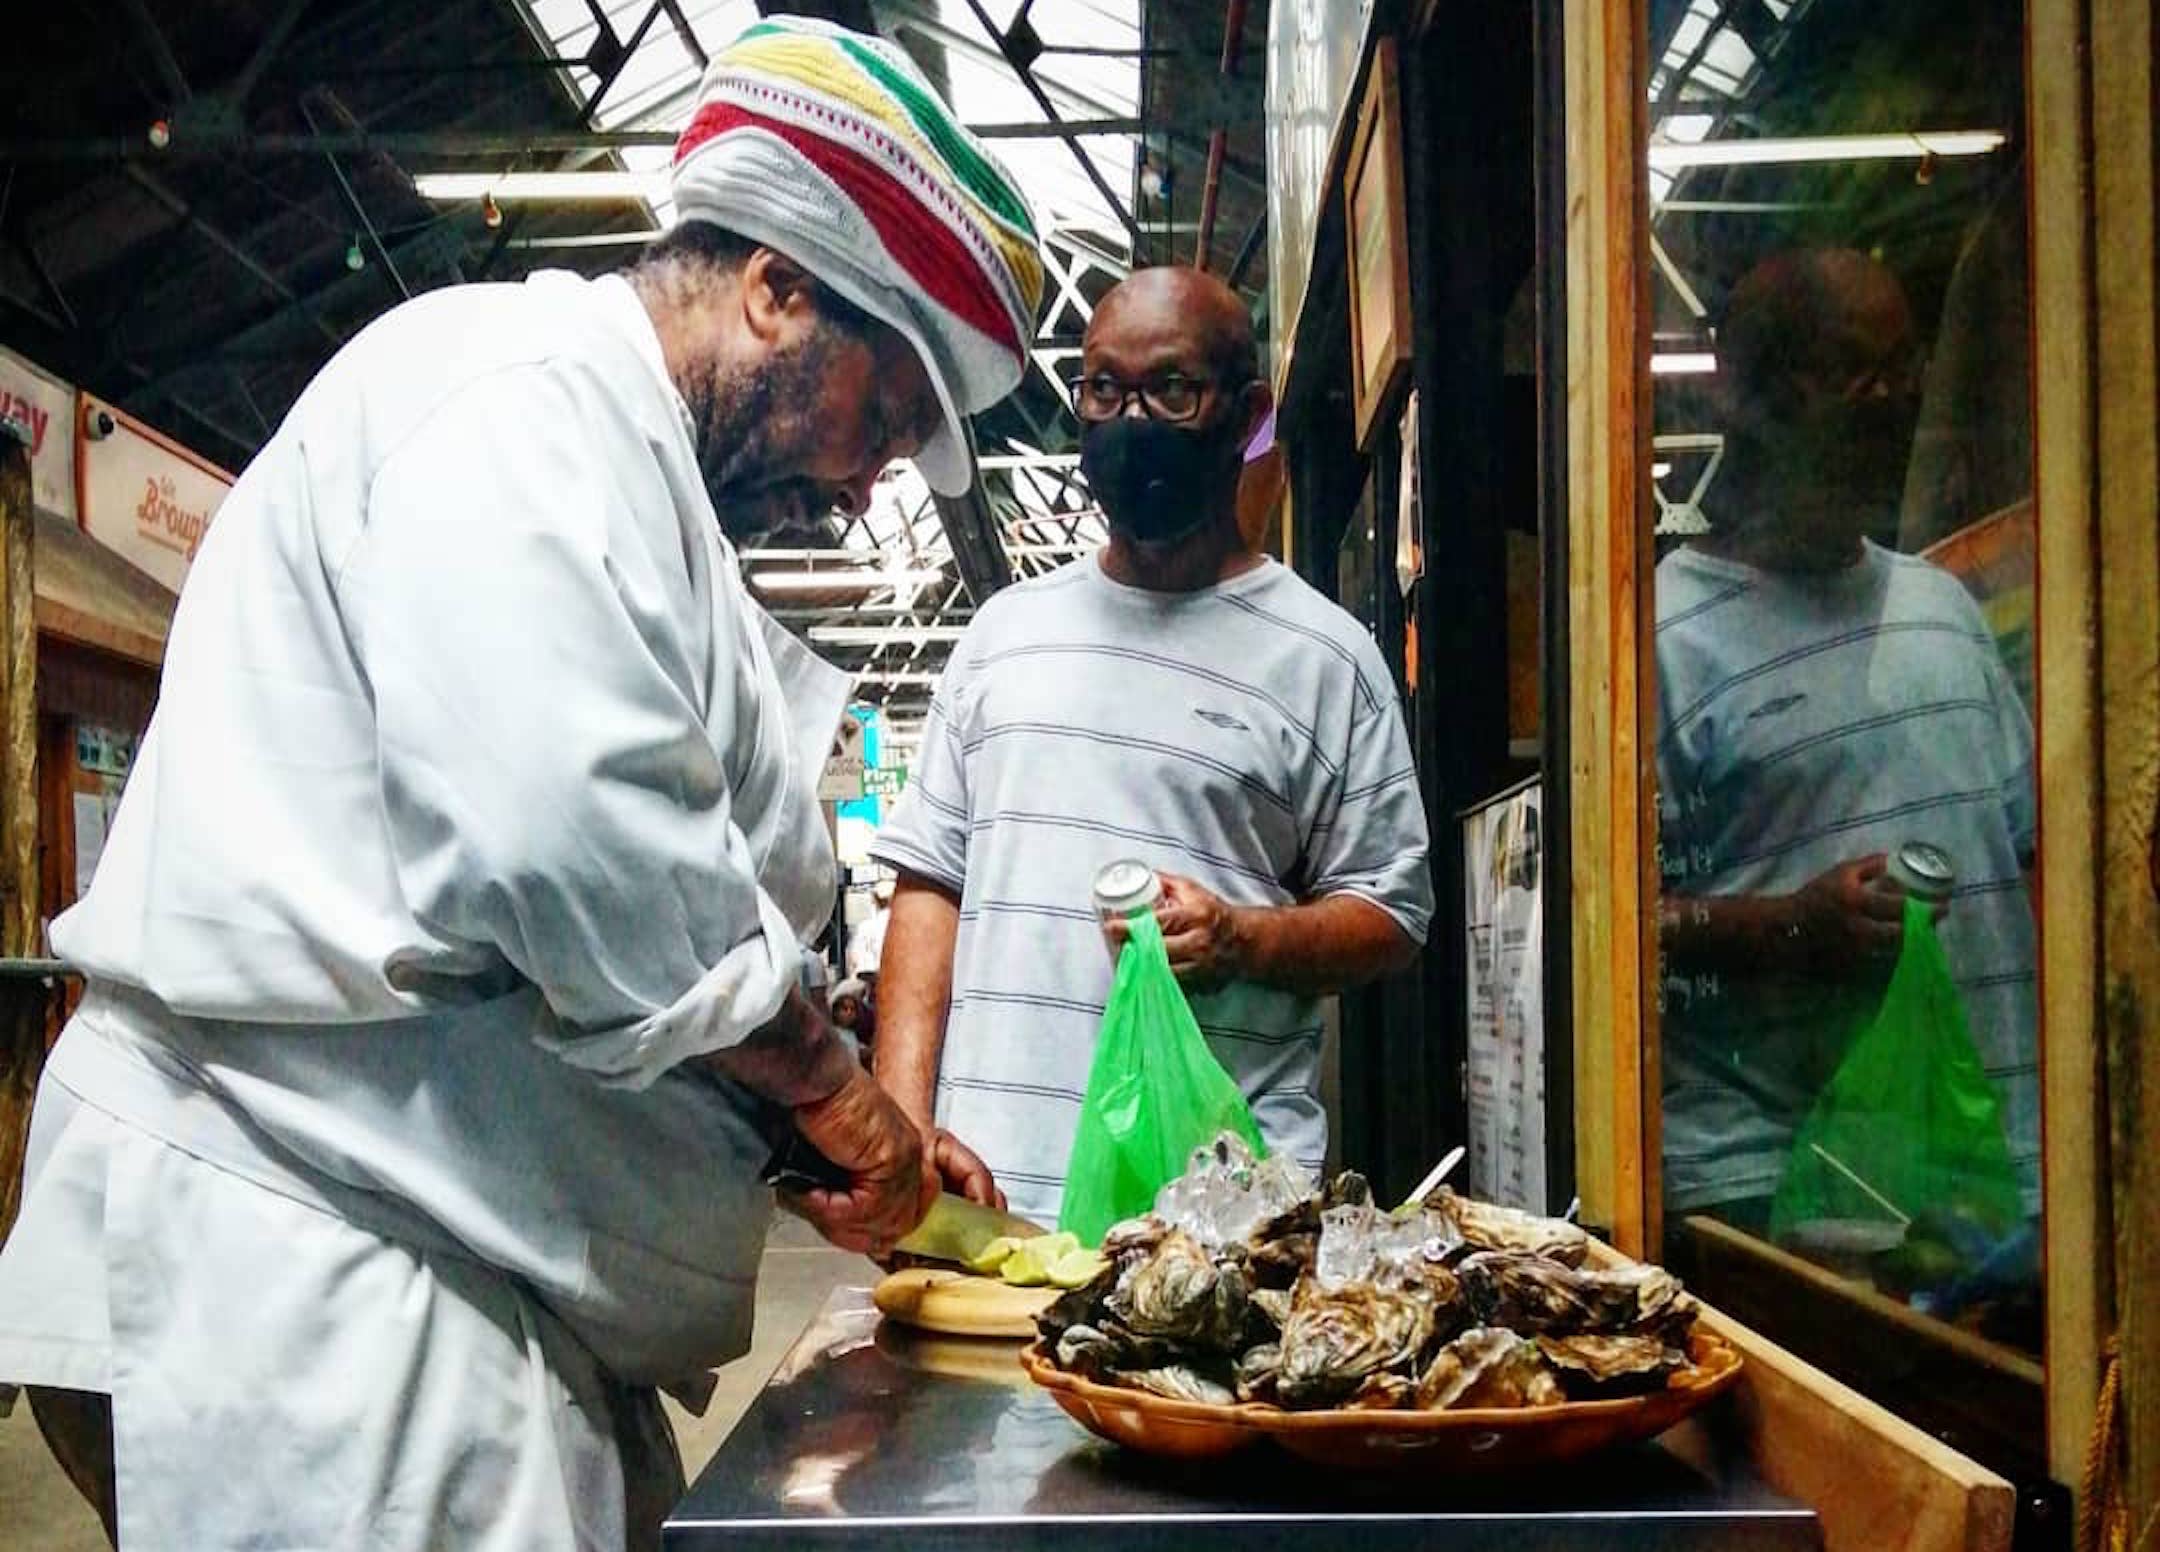 Christopher preparing oysters at The Lone Fisherman in Tooting Market, with a customer waiting